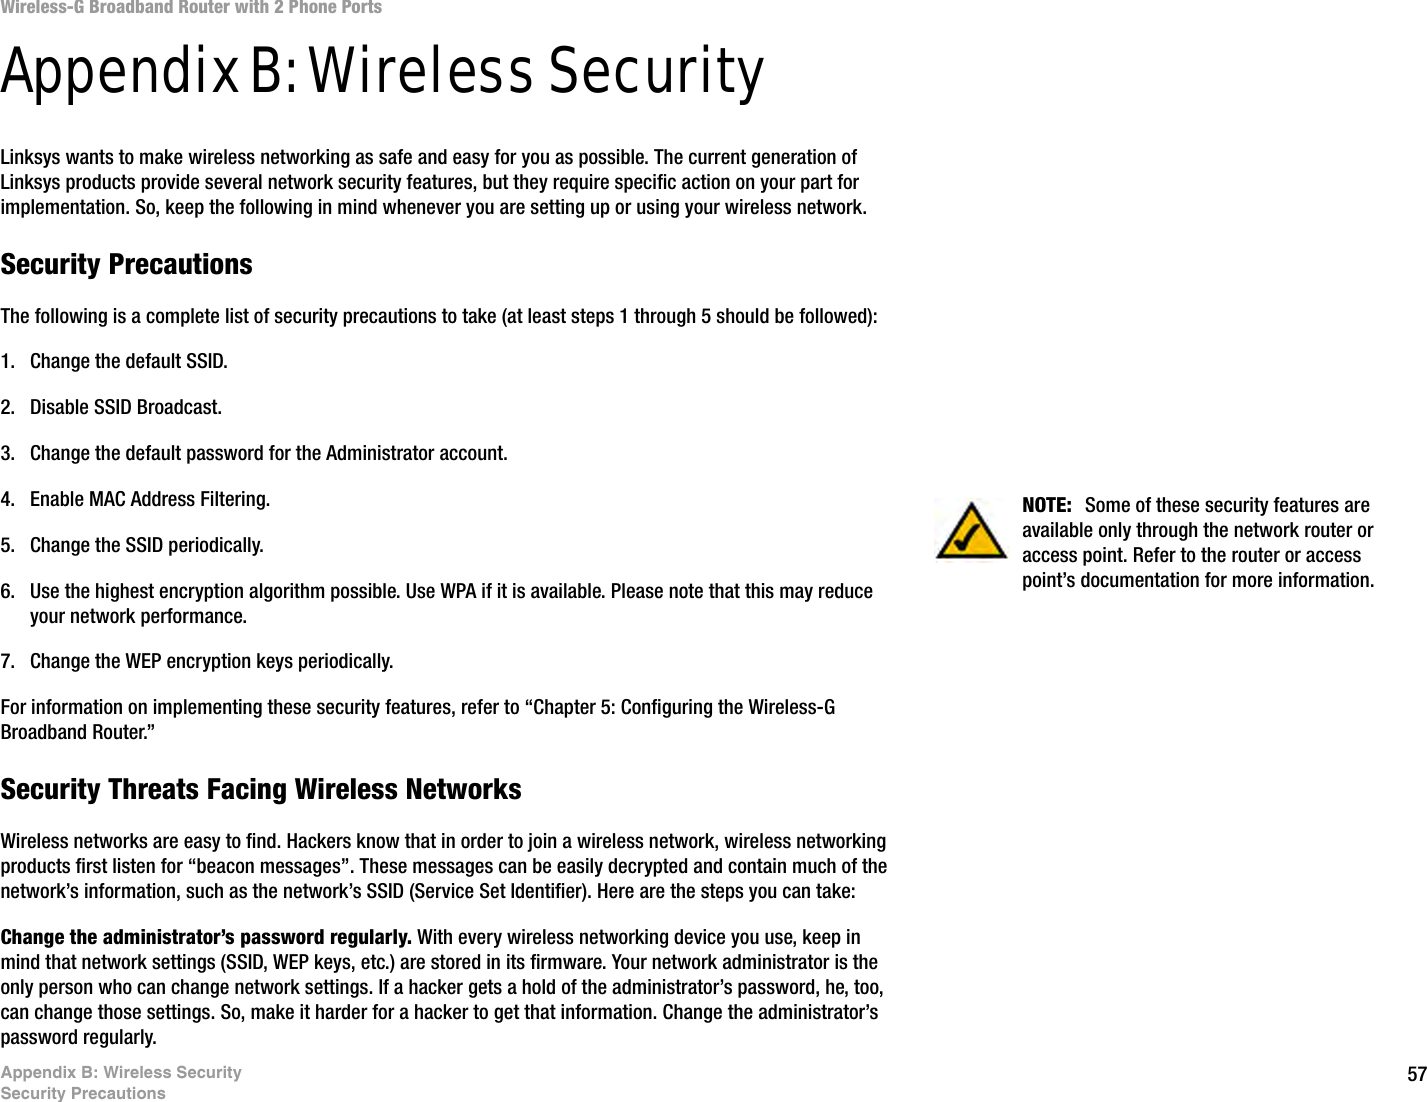 57Appendix B: Wireless SecuritySecurity PrecautionsWireless-G Broadband Router with 2 Phone PortsAppendix B: Wireless SecurityLinksys wants to make wireless networking as safe and easy for you as possible. The current generation of Linksys products provide several network security features, but they require specific action on your part for implementation. So, keep the following in mind whenever you are setting up or using your wireless network.Security PrecautionsThe following is a complete list of security precautions to take (at least steps 1 through 5 should be followed):1. Change the default SSID. 2. Disable SSID Broadcast. 3. Change the default password for the Administrator account. 4. Enable MAC Address Filtering. 5. Change the SSID periodically. 6. Use the highest encryption algorithm possible. Use WPA if it is available. Please note that this may reduce your network performance. 7. Change the WEP encryption keys periodically. For information on implementing these security features, refer to “Chapter 5: Configuring the Wireless-G Broadband Router.”Security Threats Facing Wireless Networks Wireless networks are easy to find. Hackers know that in order to join a wireless network, wireless networking products first listen for “beacon messages”. These messages can be easily decrypted and contain much of the network’s information, such as the network’s SSID (Service Set Identifier). Here are the steps you can take:Change the administrator’s password regularly. With every wireless networking device you use, keep in mind that network settings (SSID, WEP keys, etc.) are stored in its firmware. Your network administrator is the only person who can change network settings. If a hacker gets a hold of the administrator’s password, he, too, can change those settings. So, make it harder for a hacker to get that information. Change the administrator’s password regularly.NOTE:  Some of these security features are available only through the network router or access point. Refer to the router or access point’s documentation for more information.